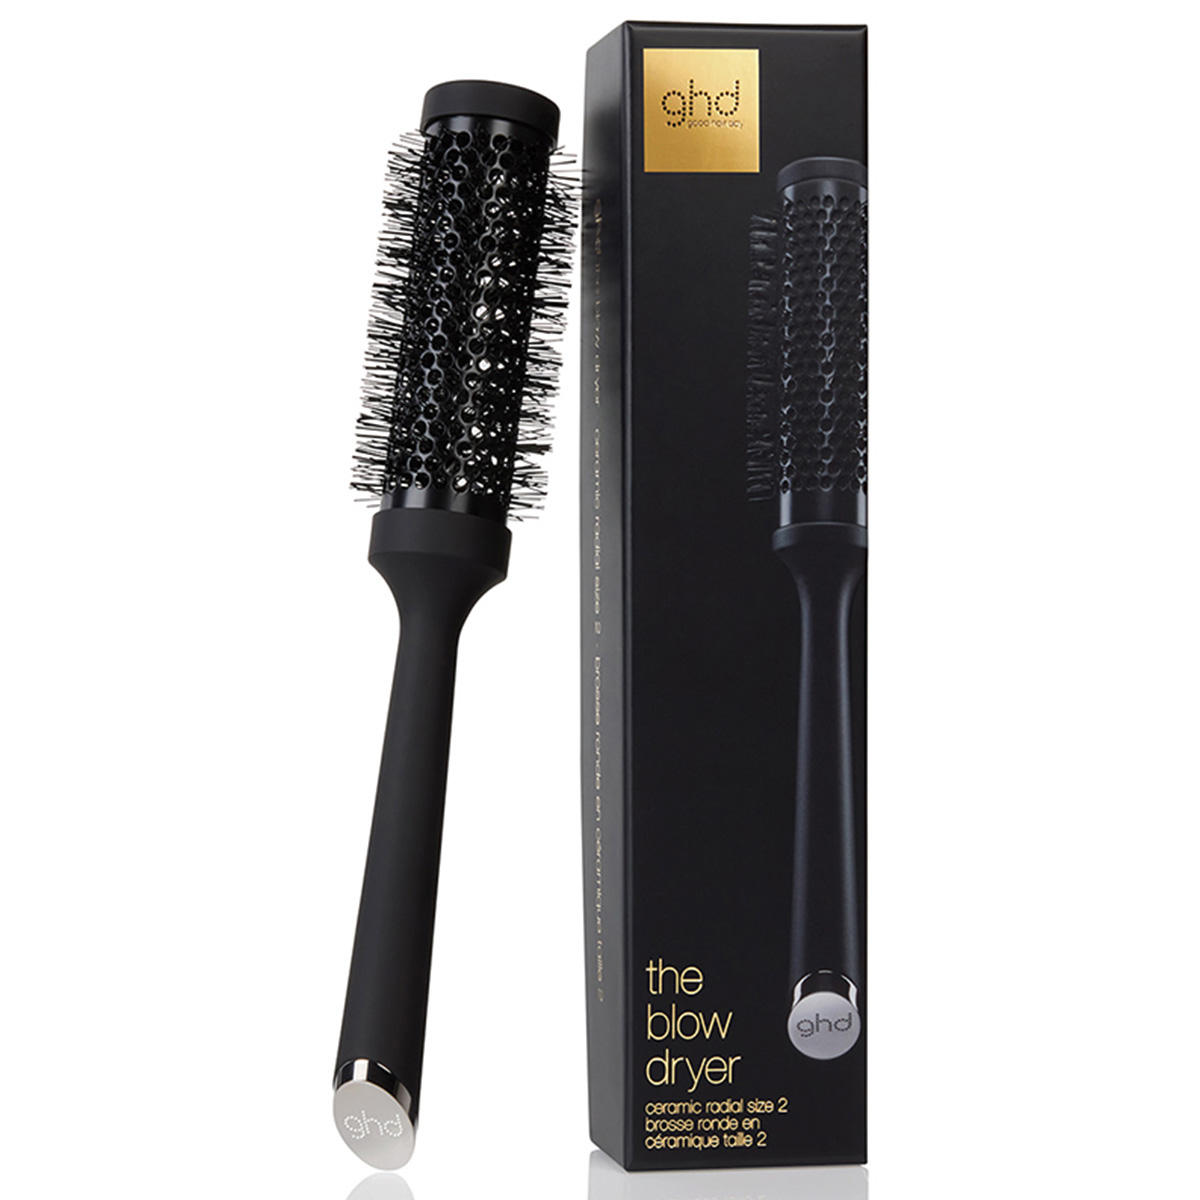 ghd the blow dryer - radial brush Size 1, Ø 35 mm - 2